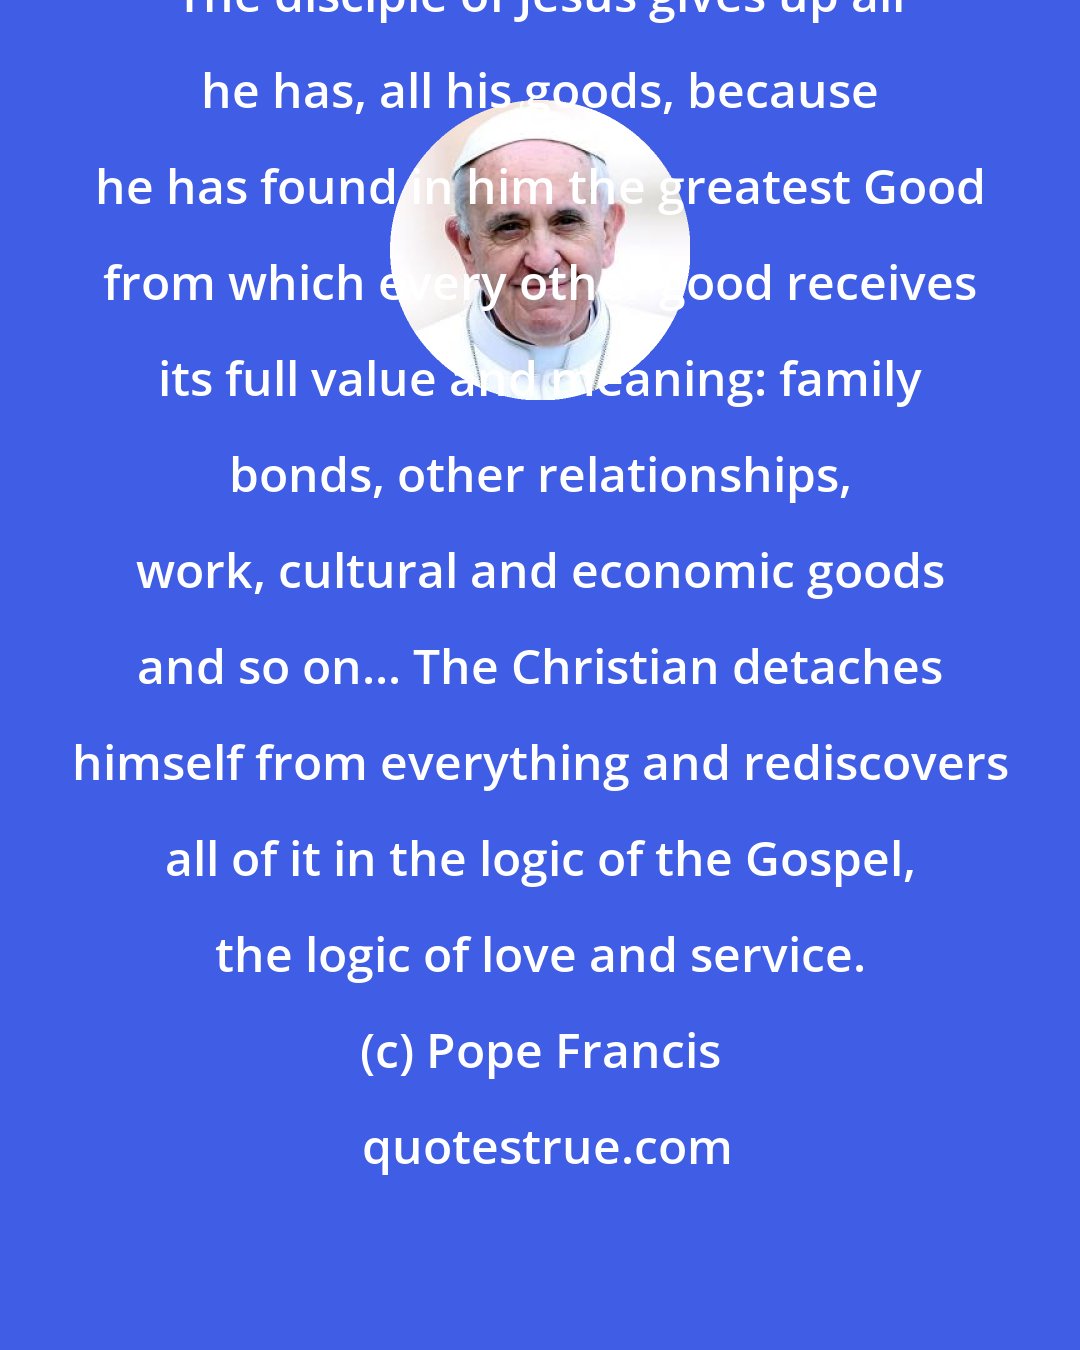 Pope Francis: The disciple of Jesus gives up all he has, all his goods, because he has found in him the greatest Good from which every other good receives its full value and meaning: family bonds, other relationships, work, cultural and economic goods and so on... The Christian detaches himself from everything and rediscovers all of it in the logic of the Gospel, the logic of love and service.